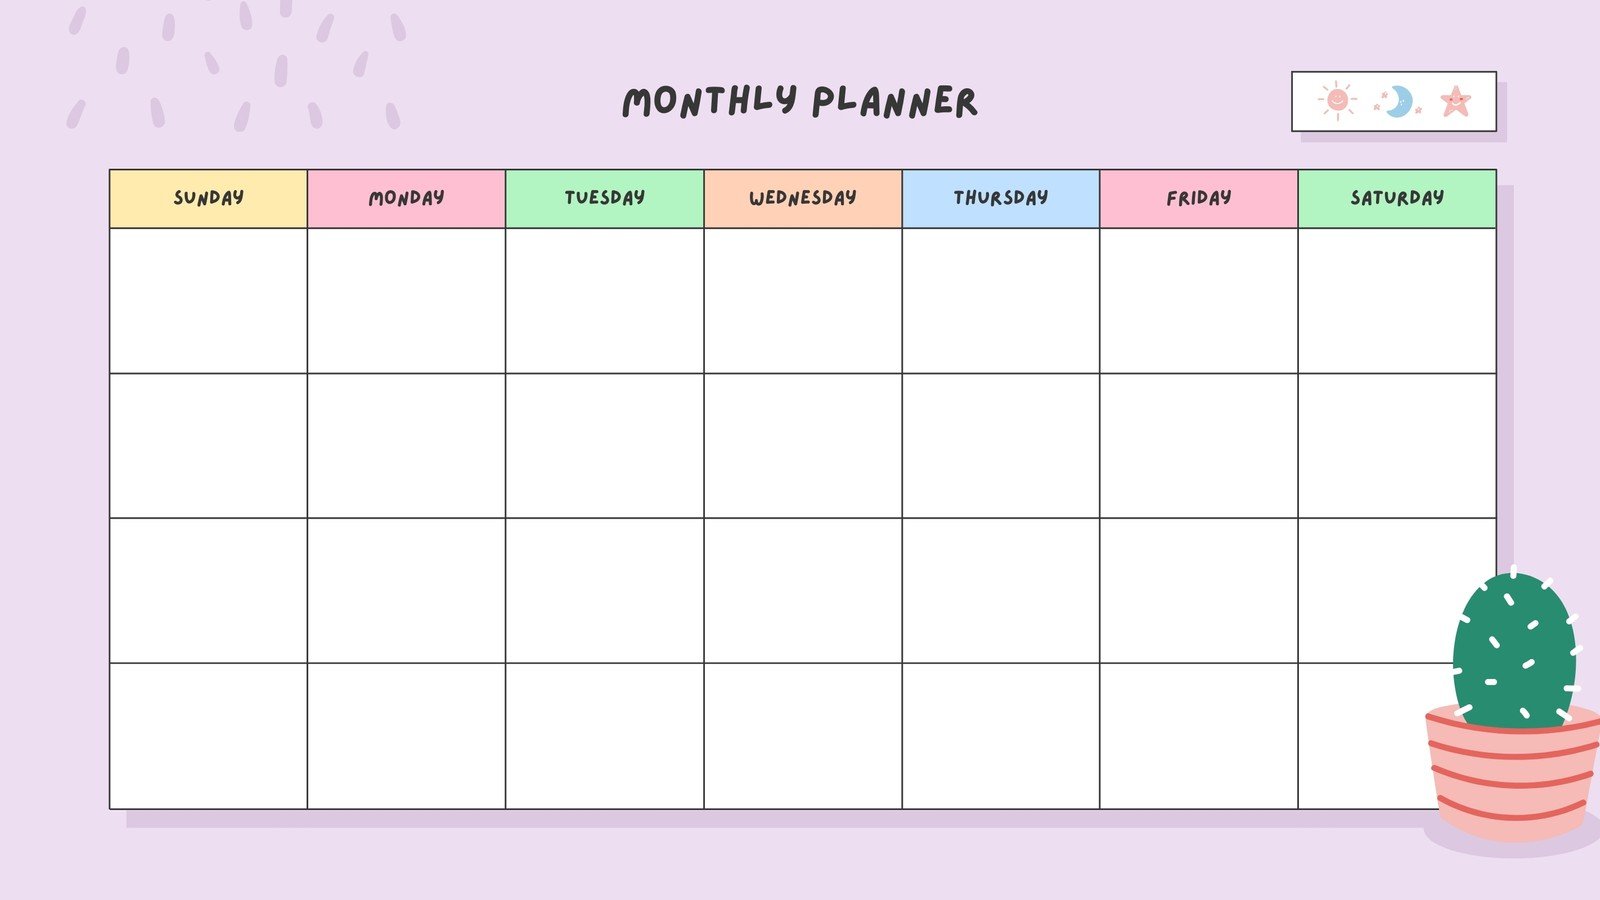 Monthly Planner Template, Online Monthly Planner